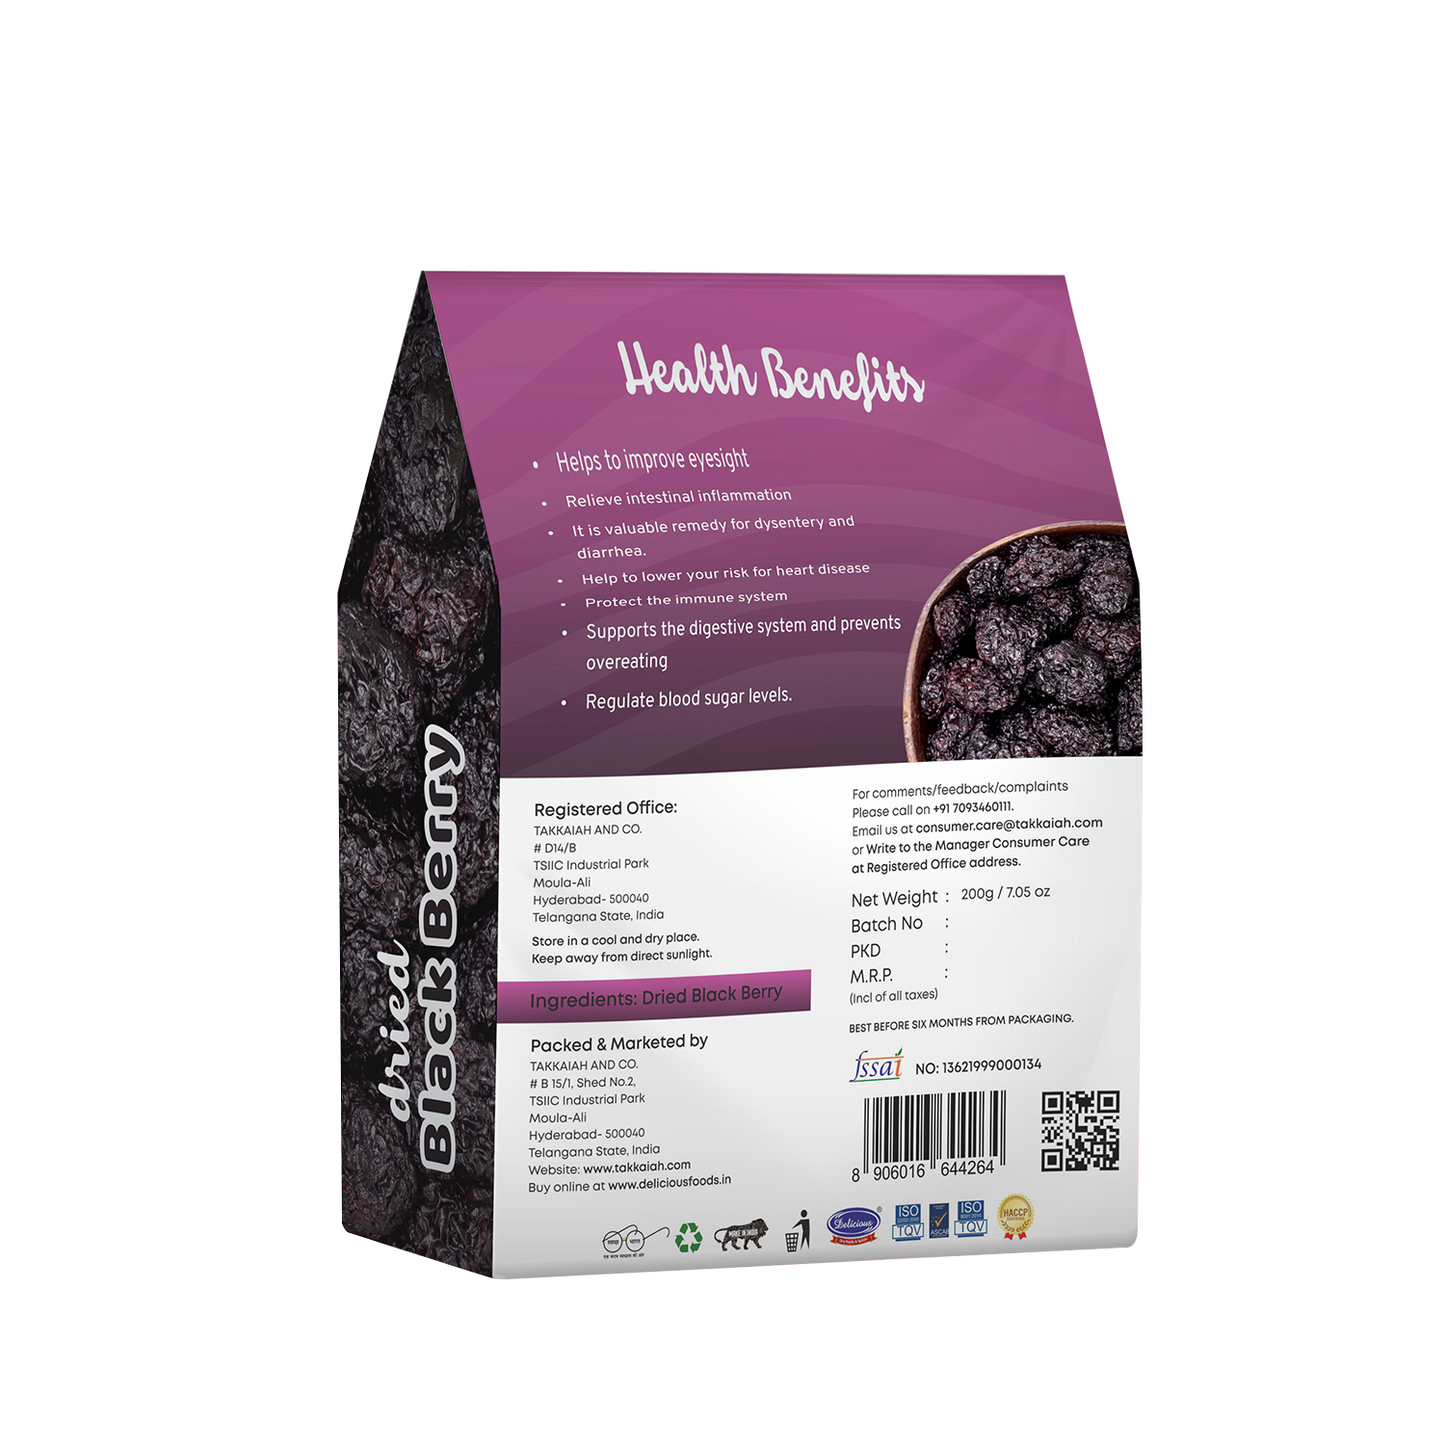 Delicious Dried Black Berry